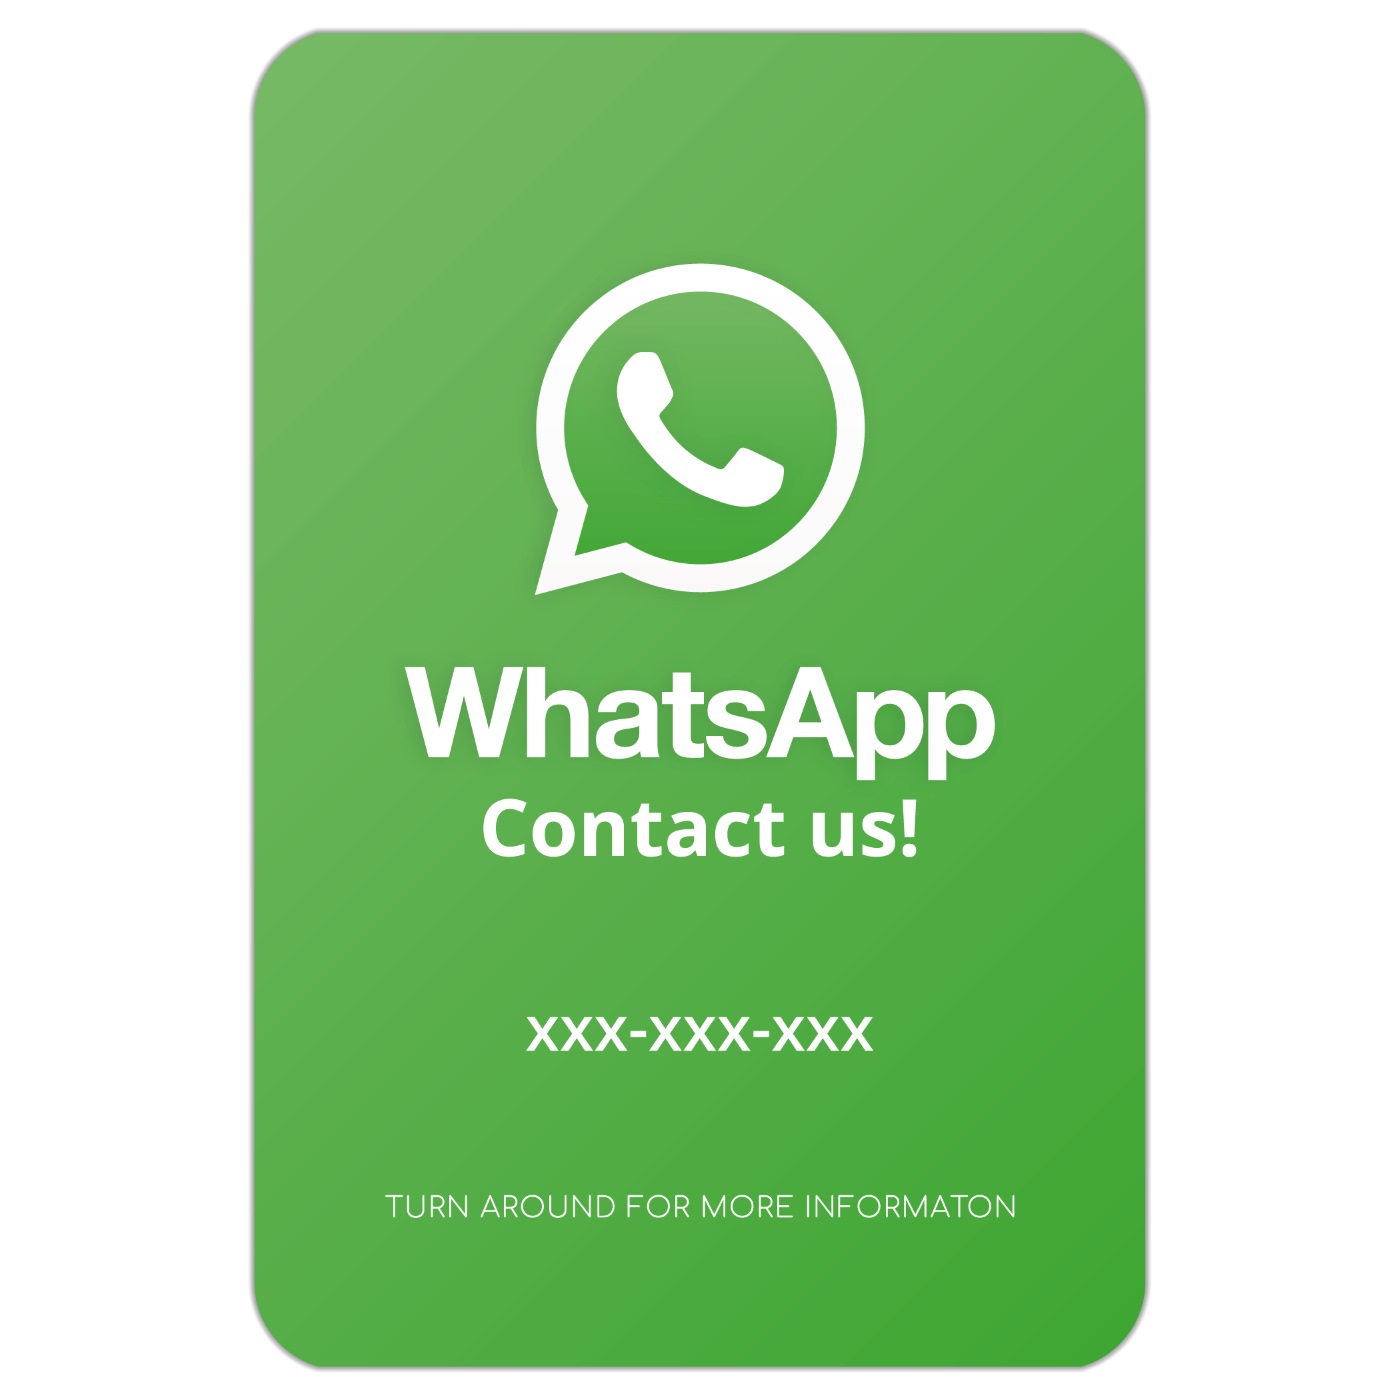 WhatsApp business card with QR code